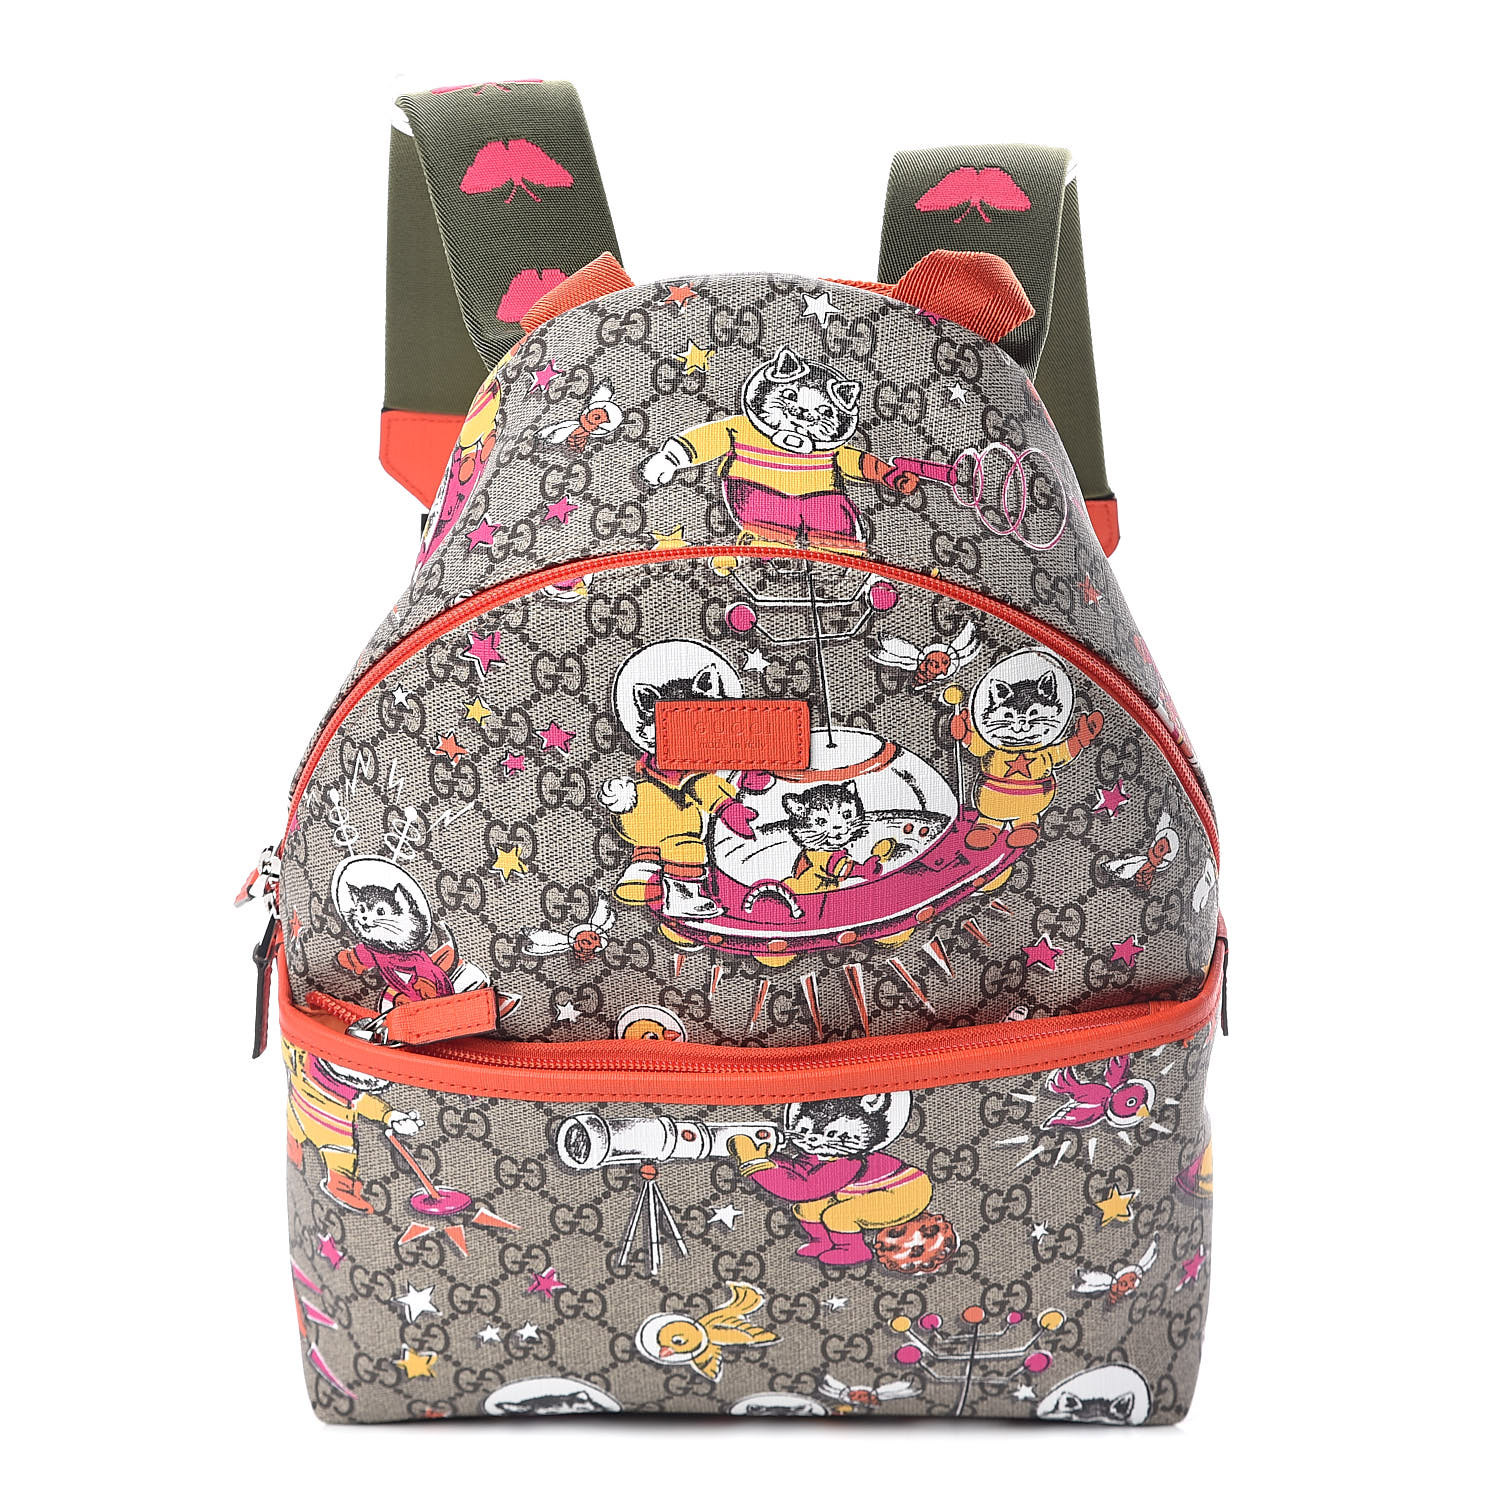 gucci children's backpack